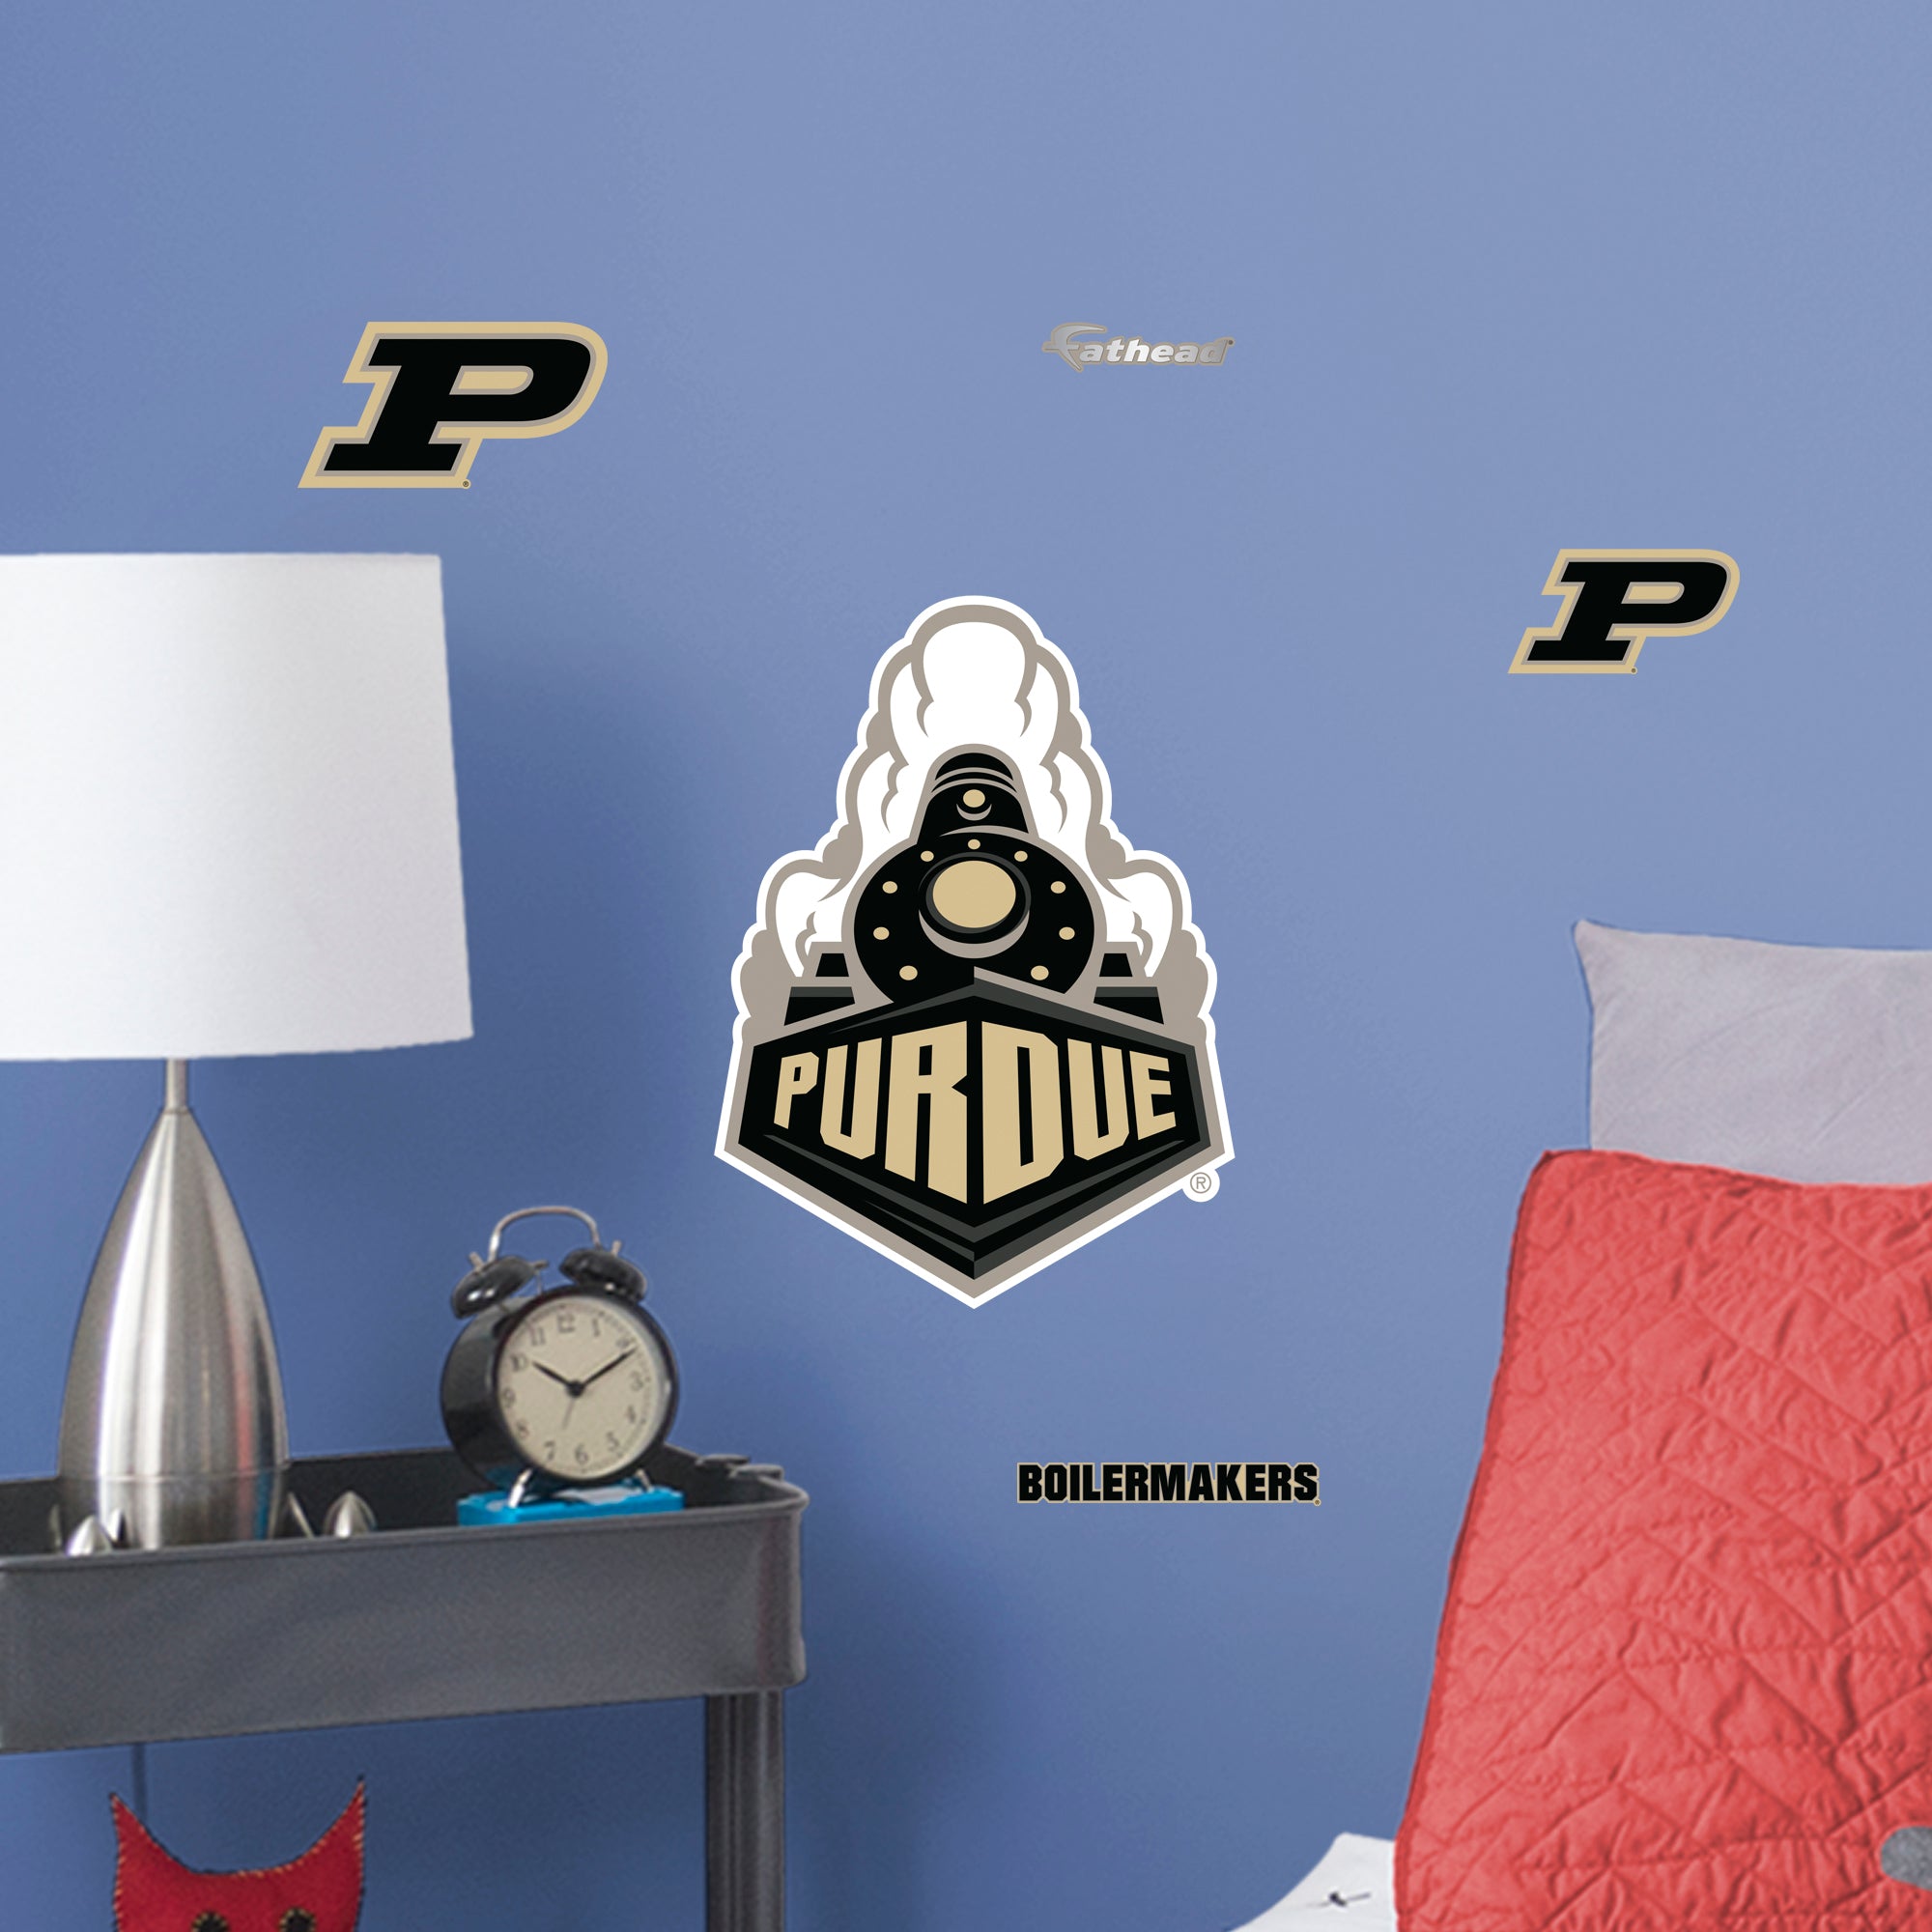 Purdue Boilermakers 2020 Train POD Teammate Logo - Officially Licensed NCAA Removable Wall Decal Large by Fathead | Vinyl